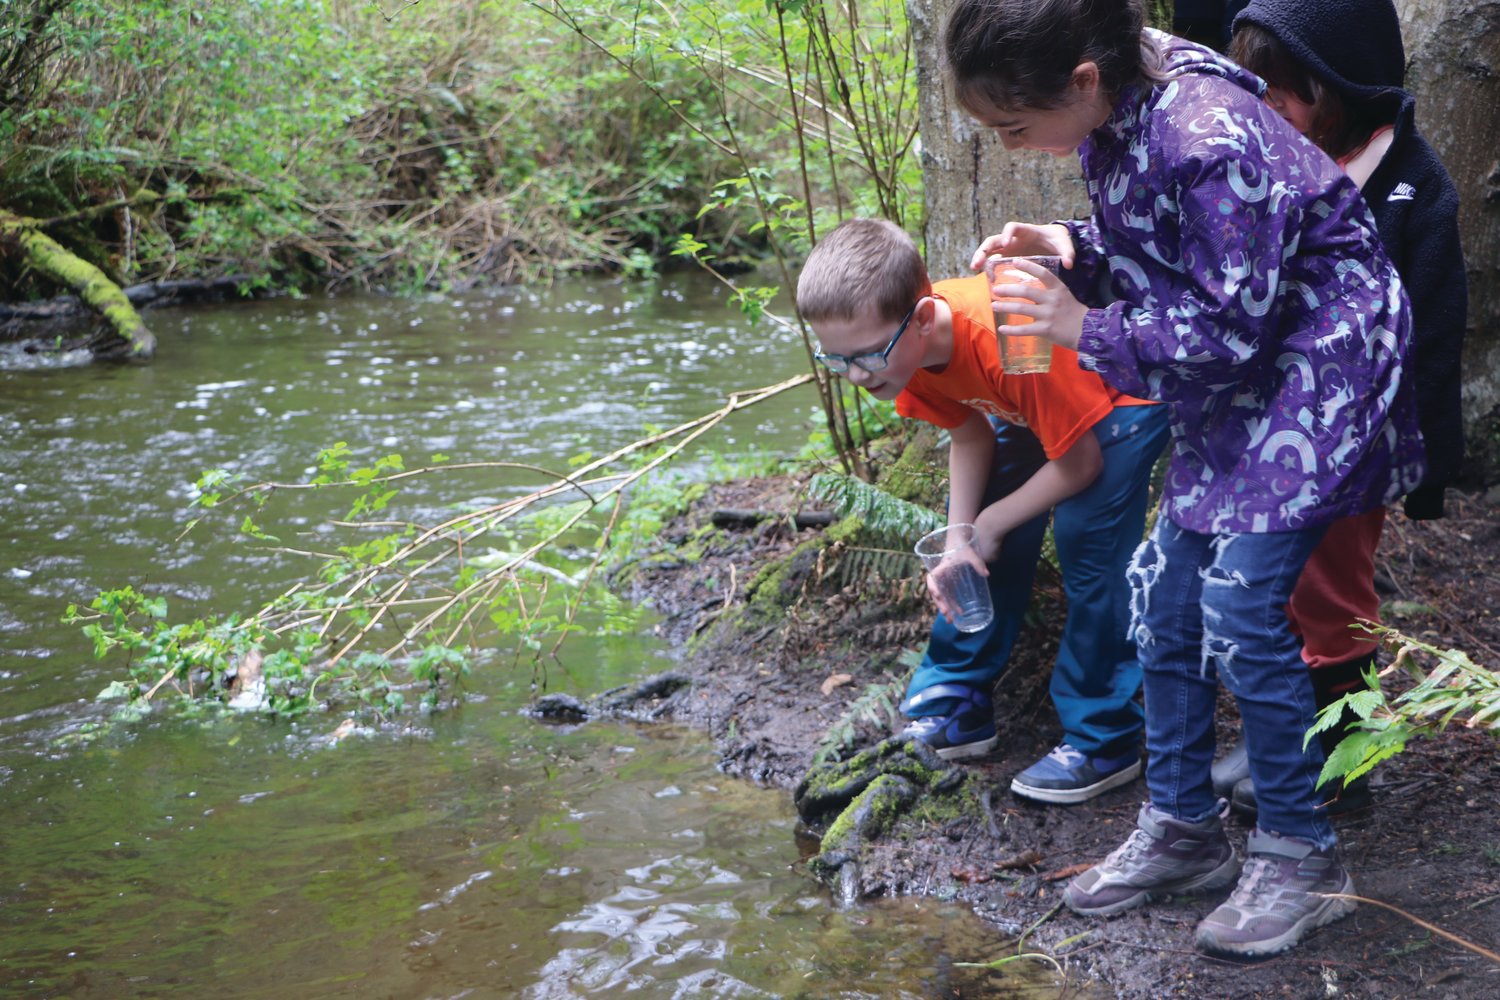 Each third-grader released an adolescent salmon into the Chimacum Creek.